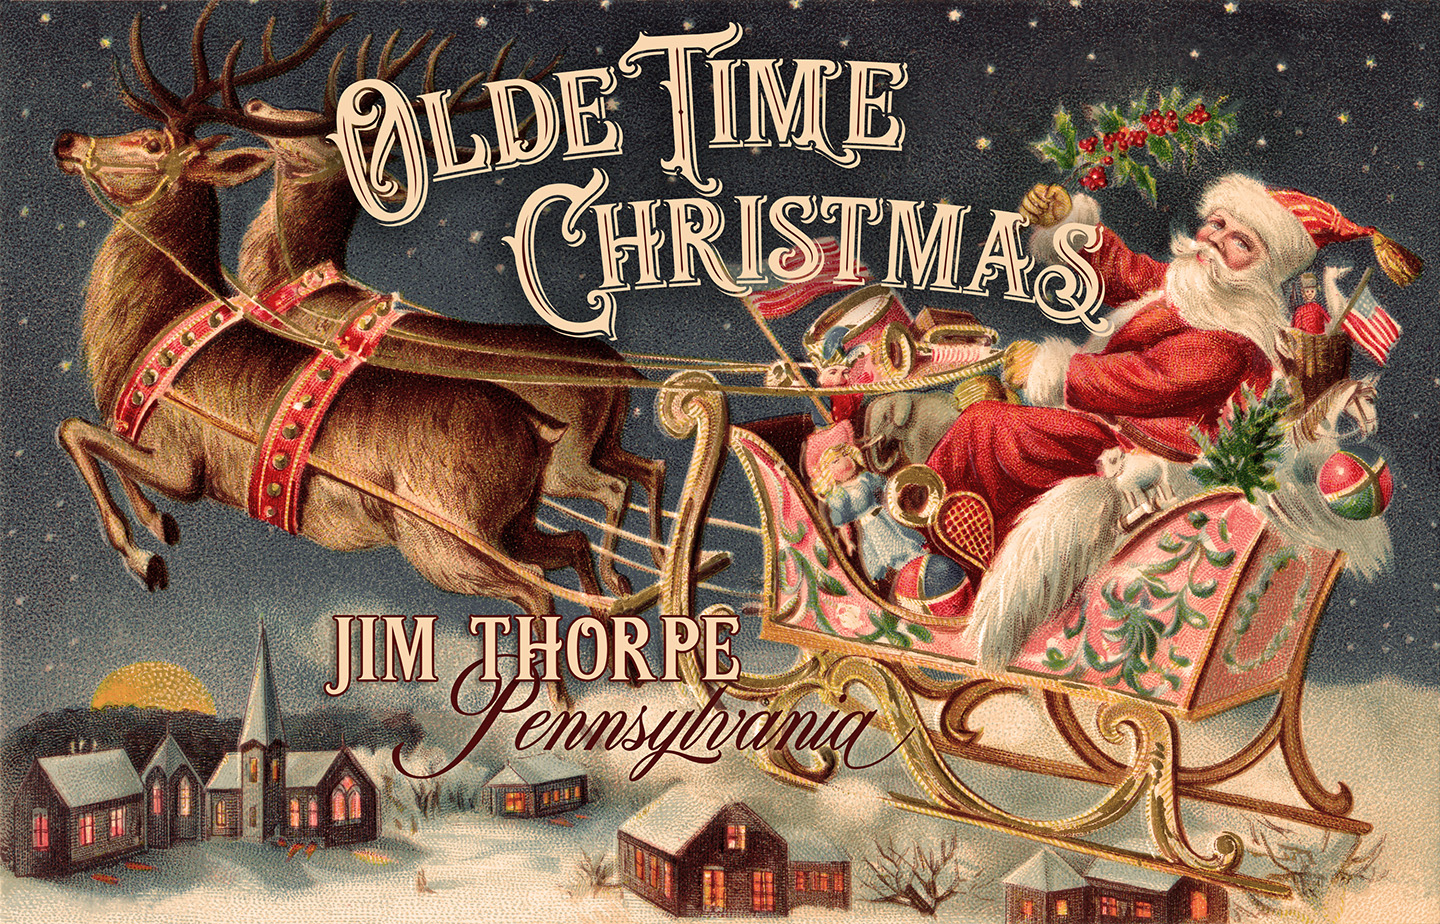 Magical Holiday Weekends Return to Jim Thorpe The Current